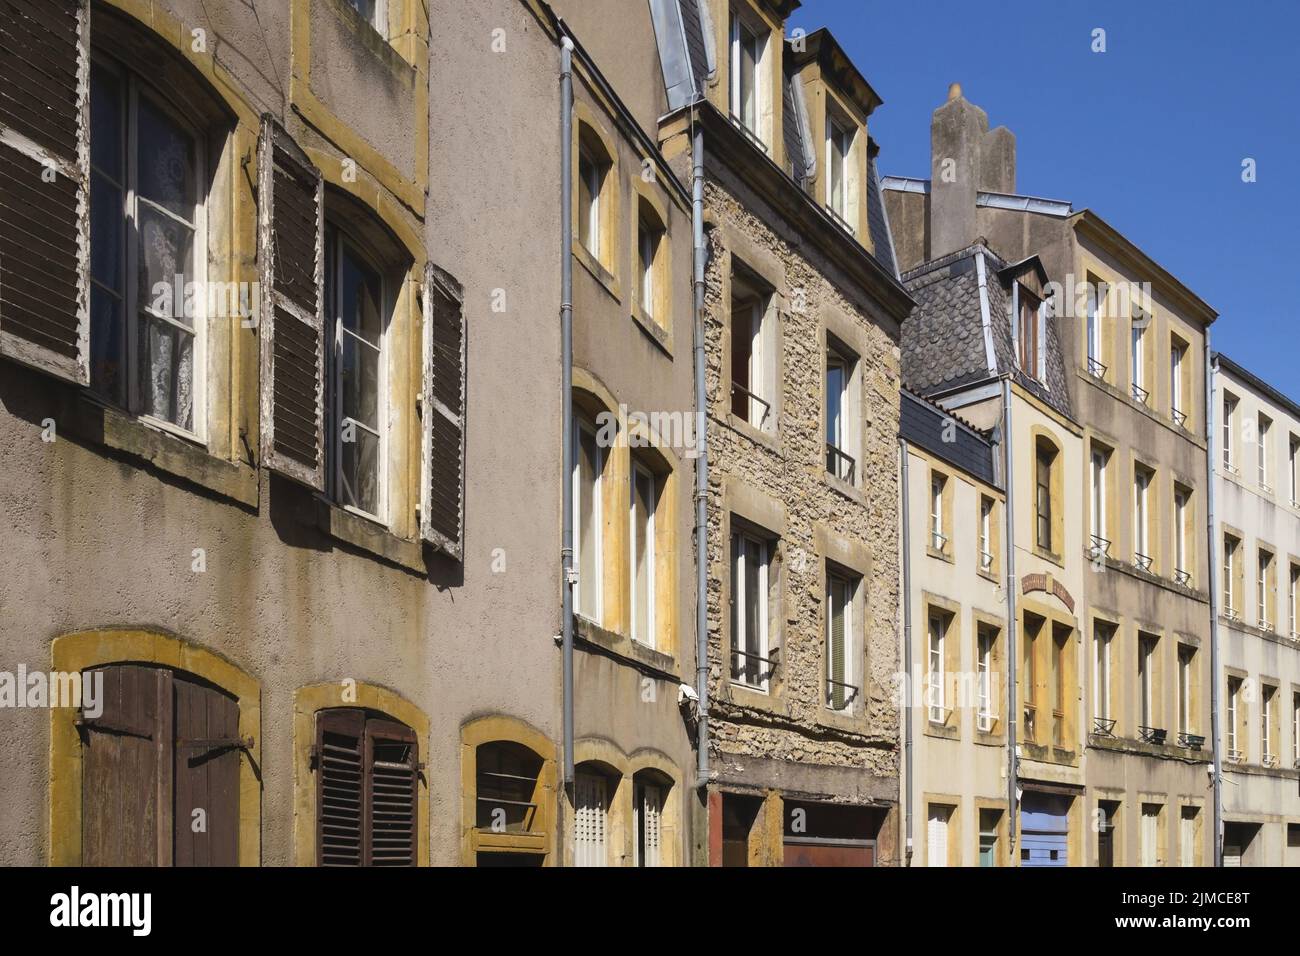 Metz - Alley in the historical old town, France Stock Photo